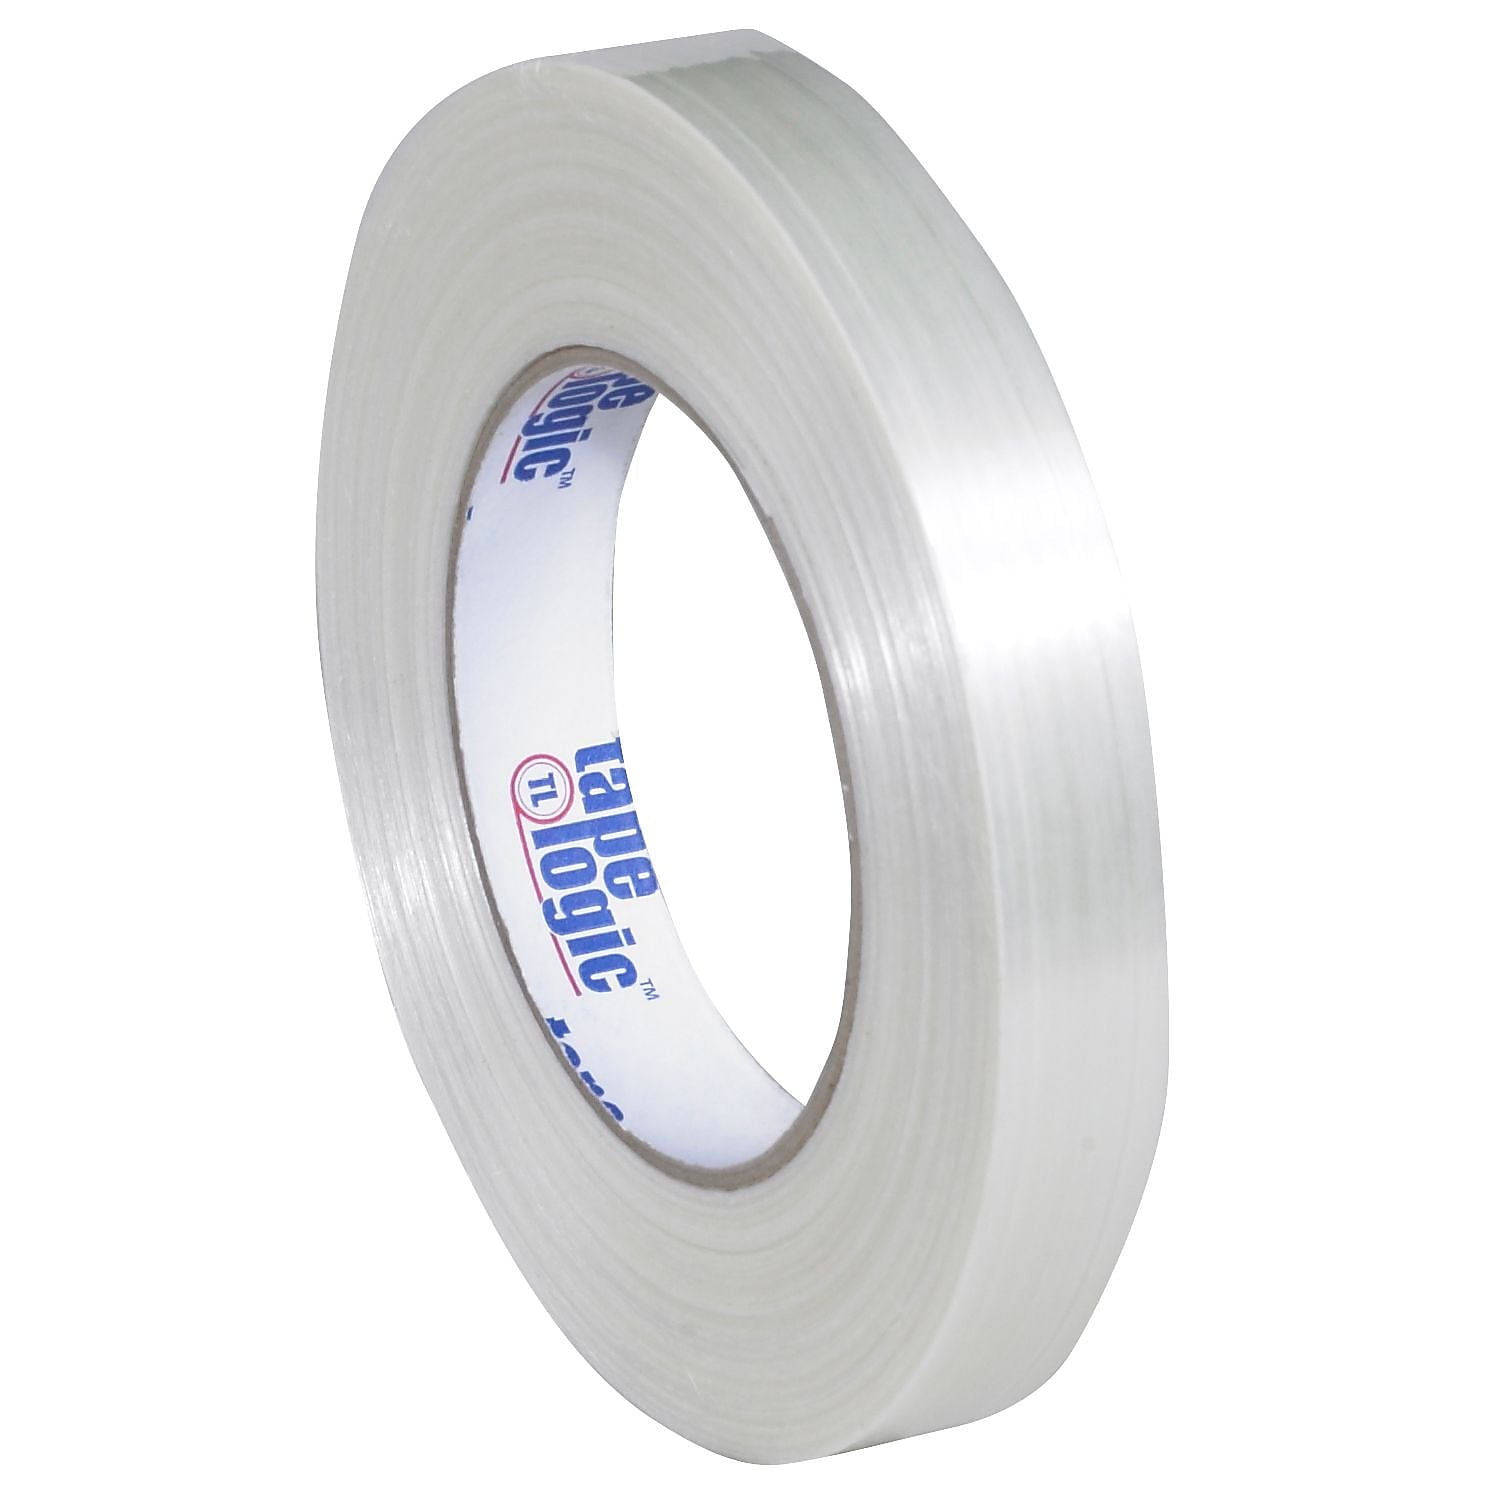 UPC 848109022420 product image for Tape Logic T914155012PK 0.75 in. x 60 yards 1550 Strapping Tape, Clear - Pack of | upcitemdb.com